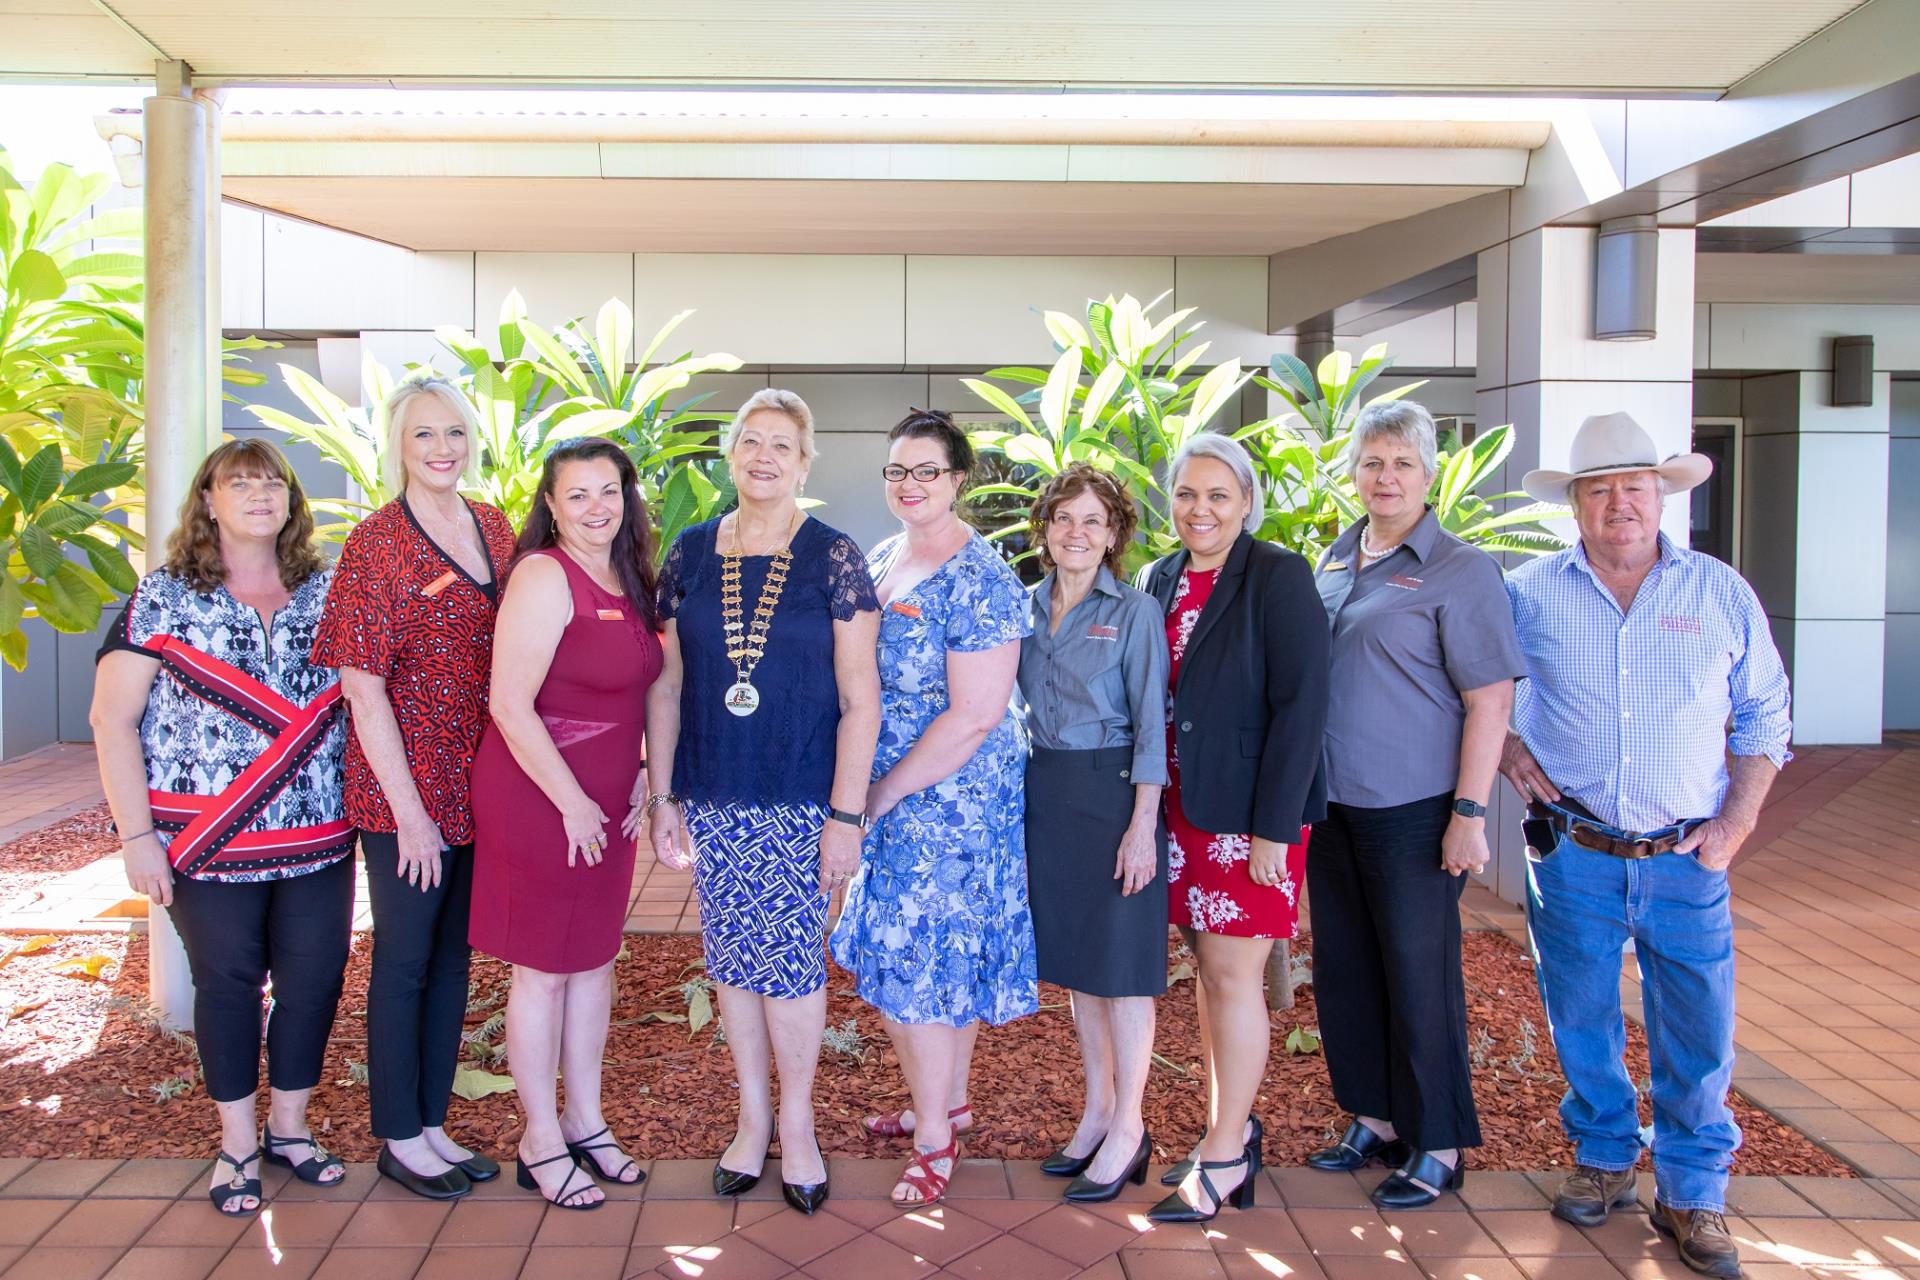 Shire President Lynne Craigie OAM Retires After Almost 18 Years